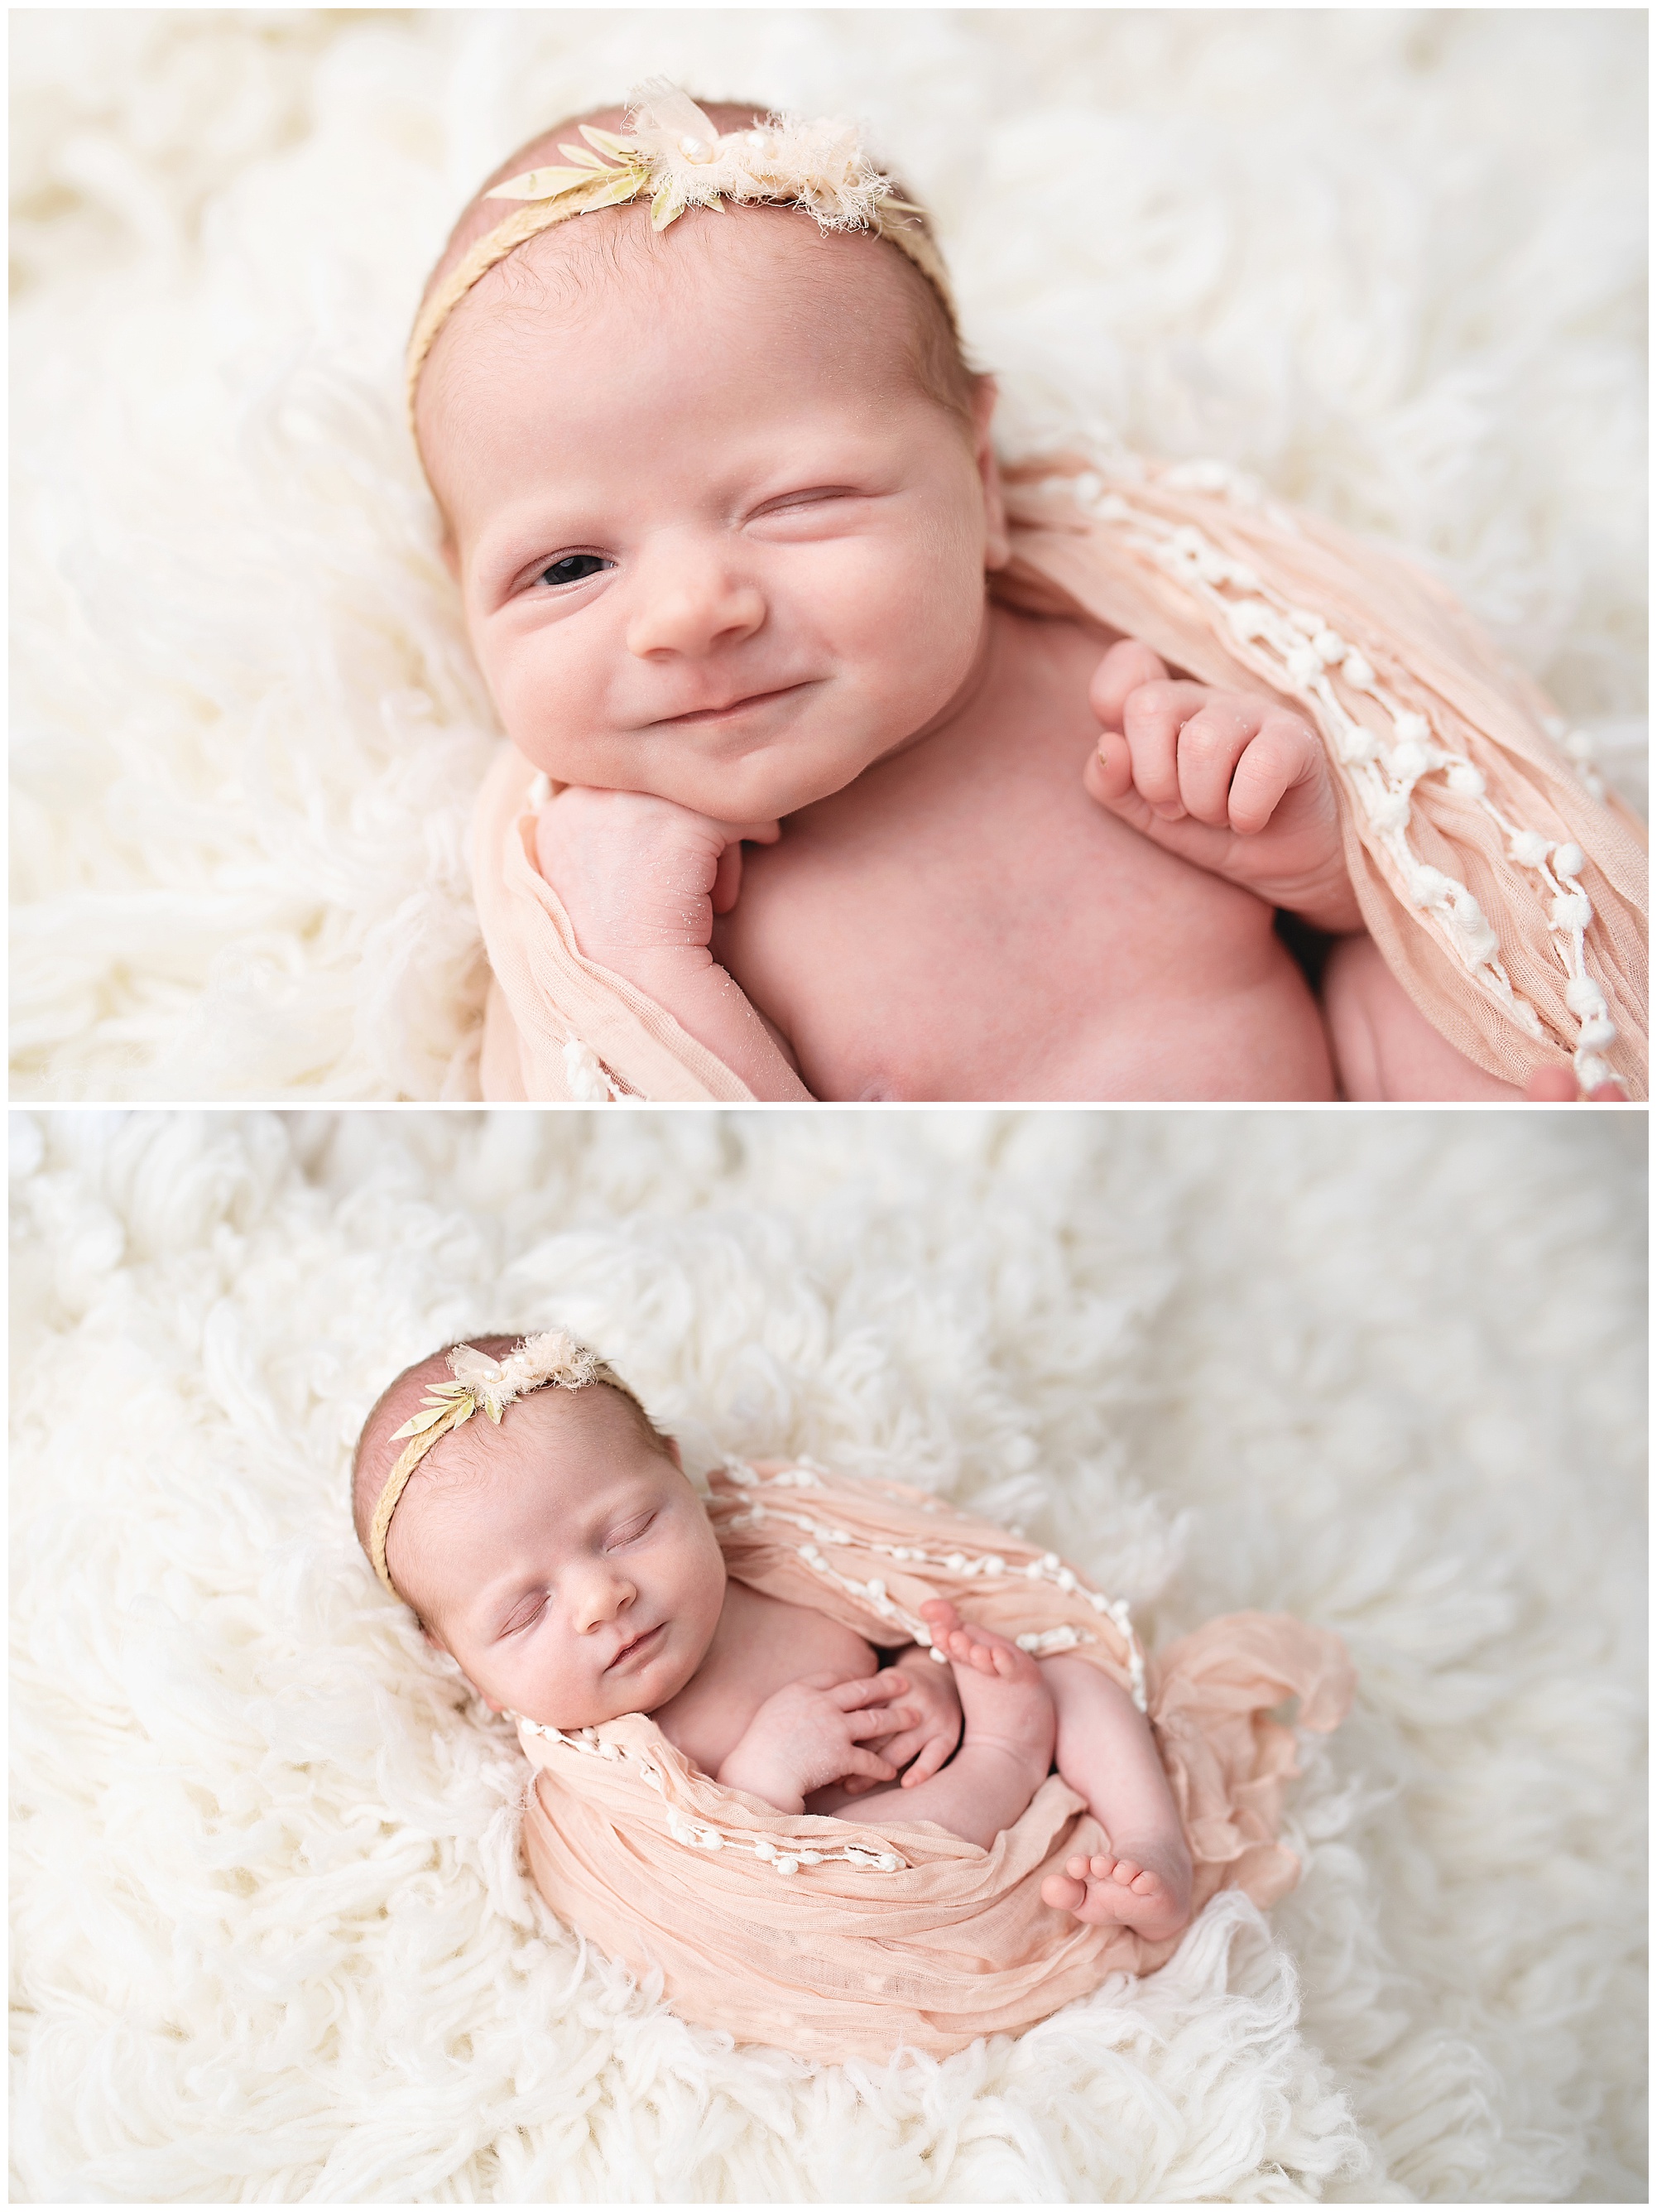 funny faces from a newborn baby girl in the studio for her newborn photo session